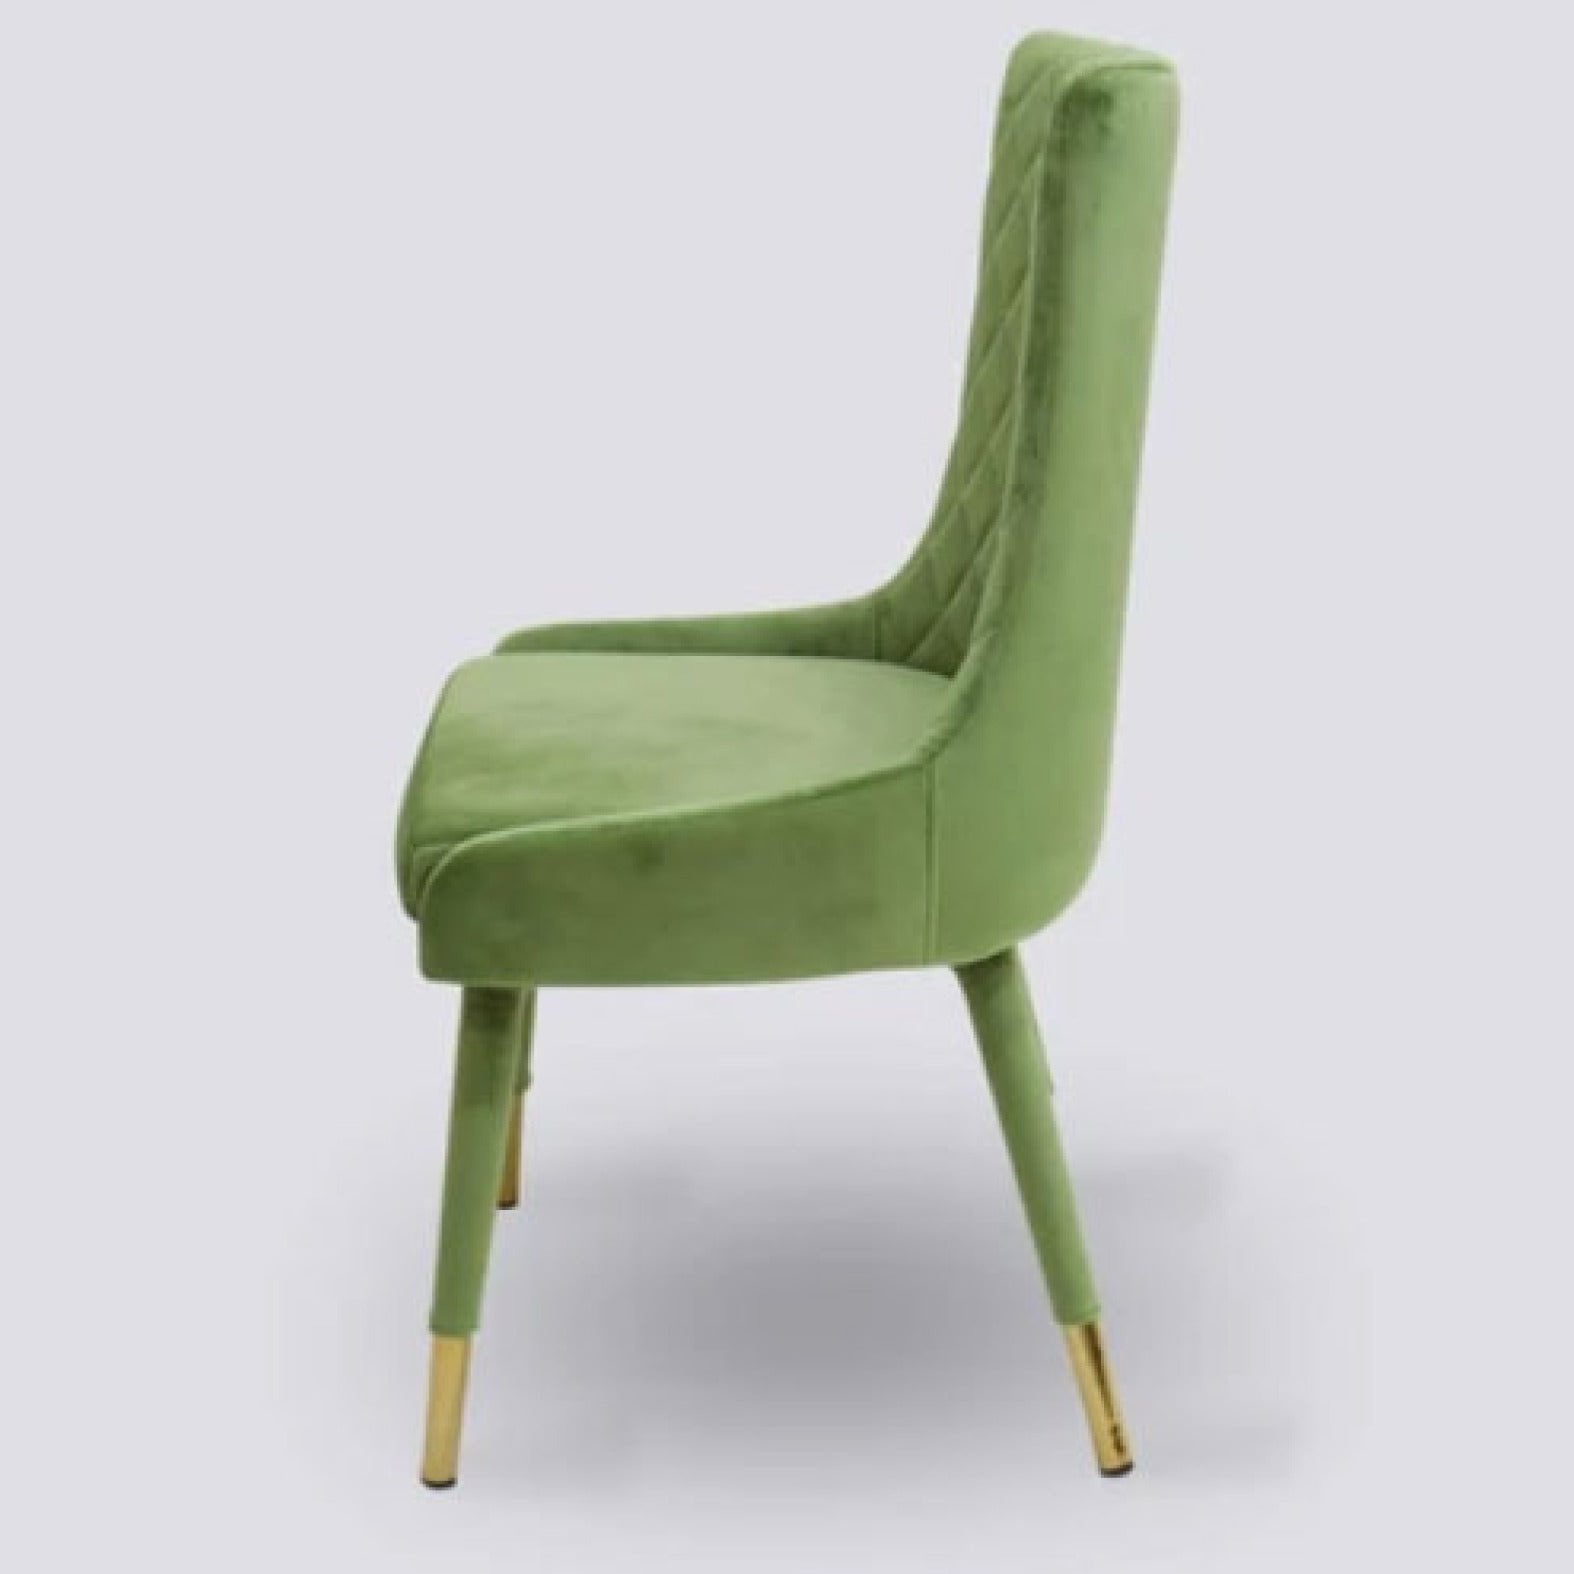 LUX-497 DINING CHAIR Mobel Furniture